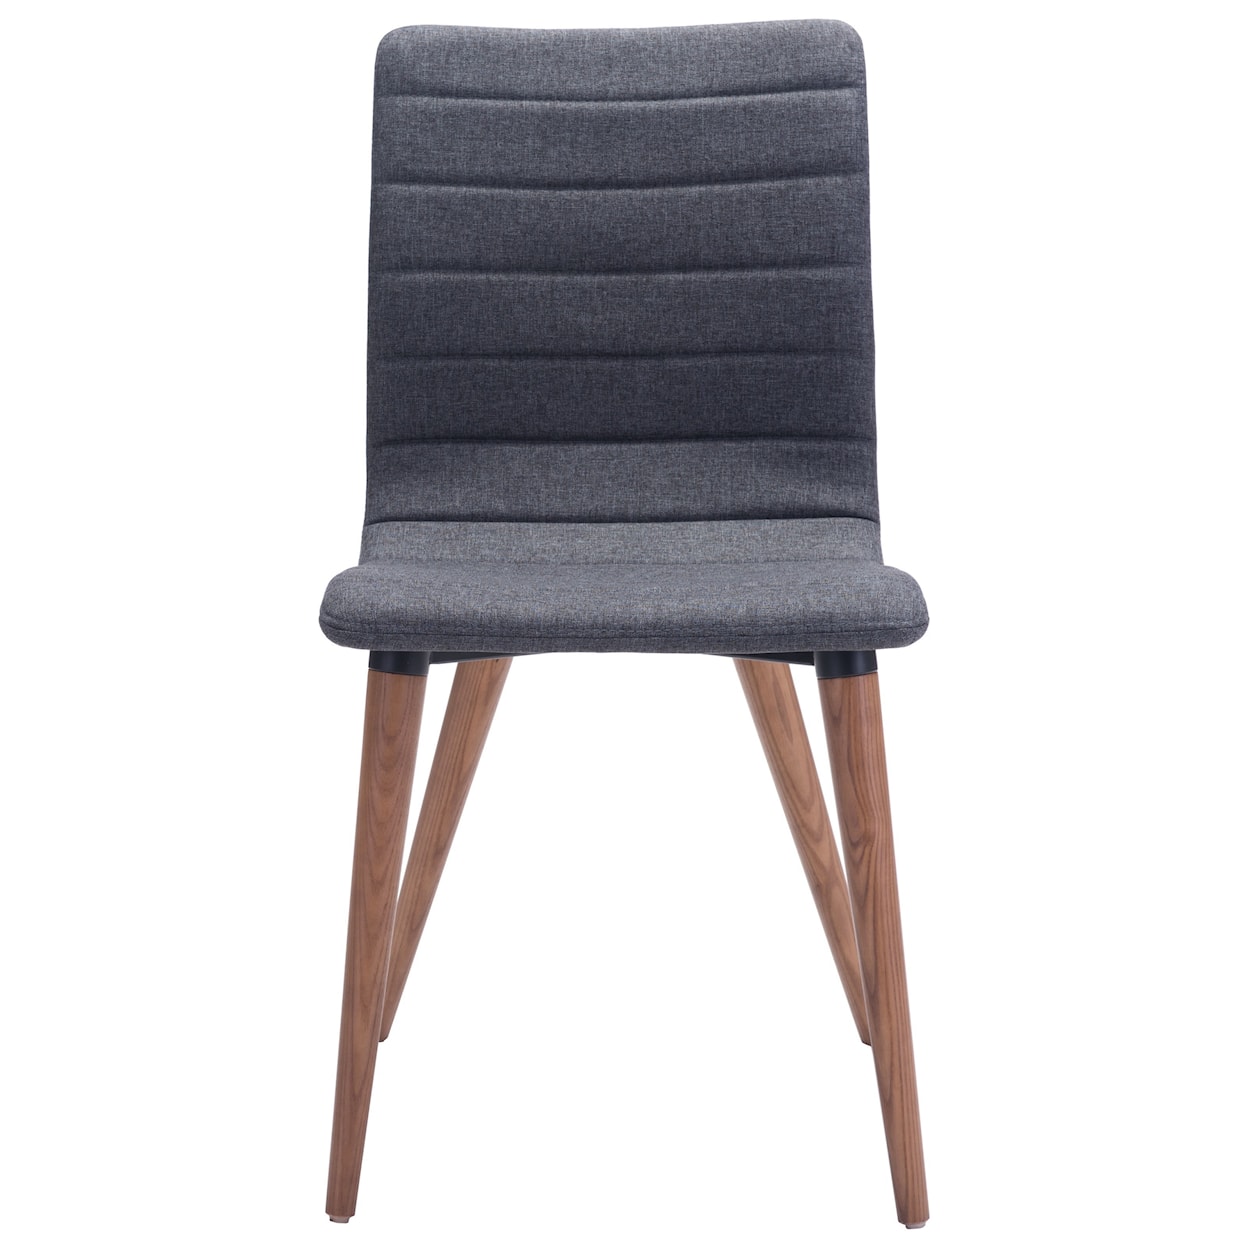 Zuo Jericho Dining Chair Set